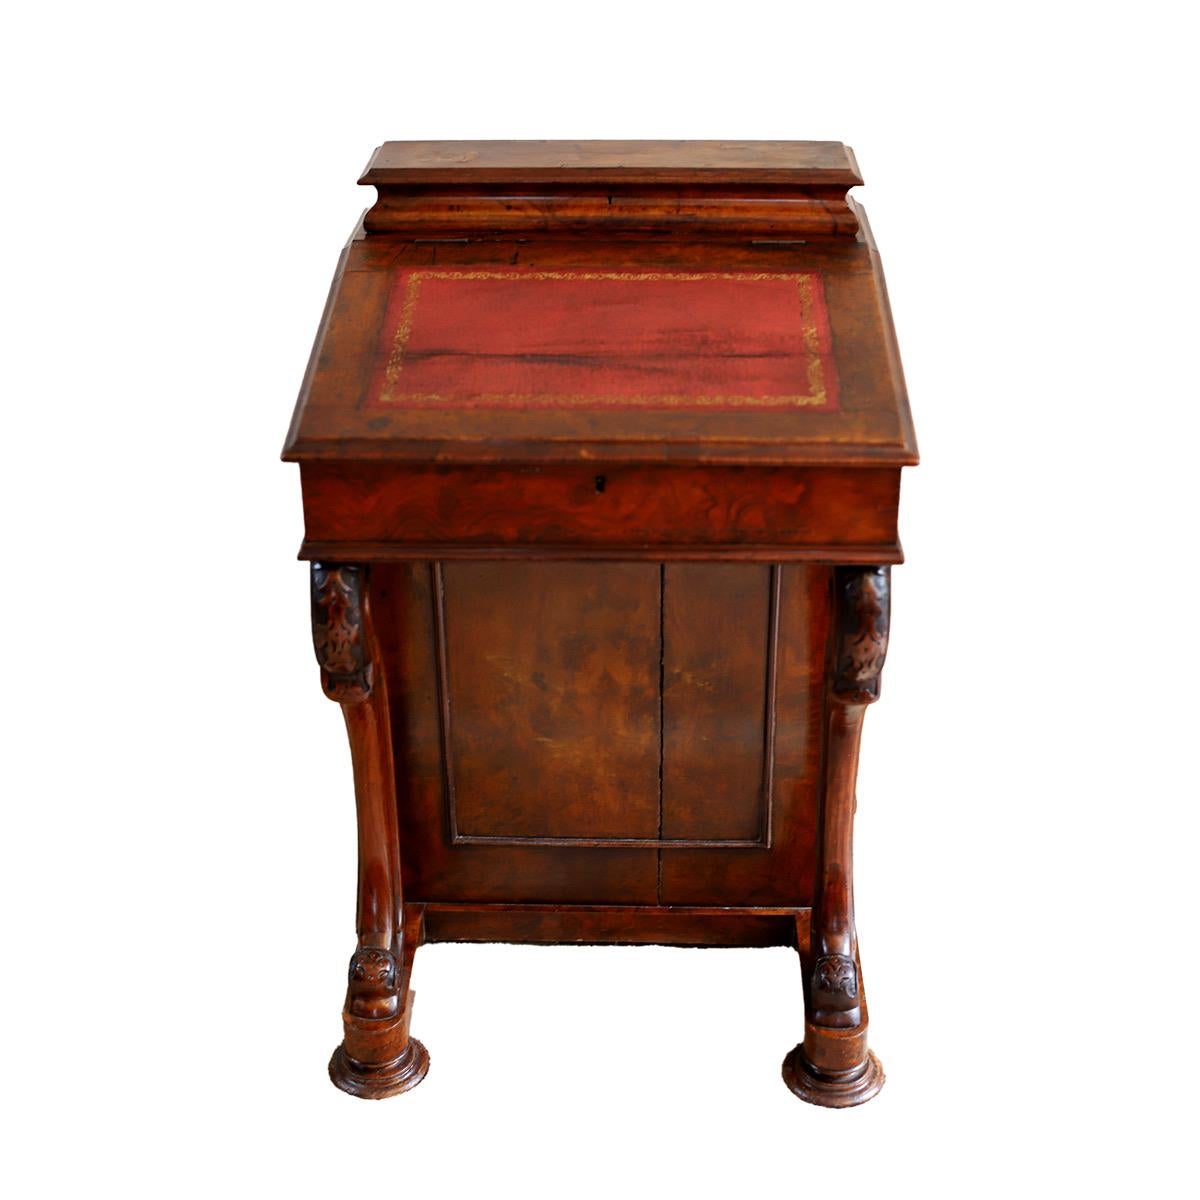 A Beautiful early-Victorian walnut Davenport fitted with four side drawers and raised on carved scroll supports.With a lift lid desk with 2 internal drawers and 4 drawers to one side and dummy drawers to the opposite side. To the top there is a lid